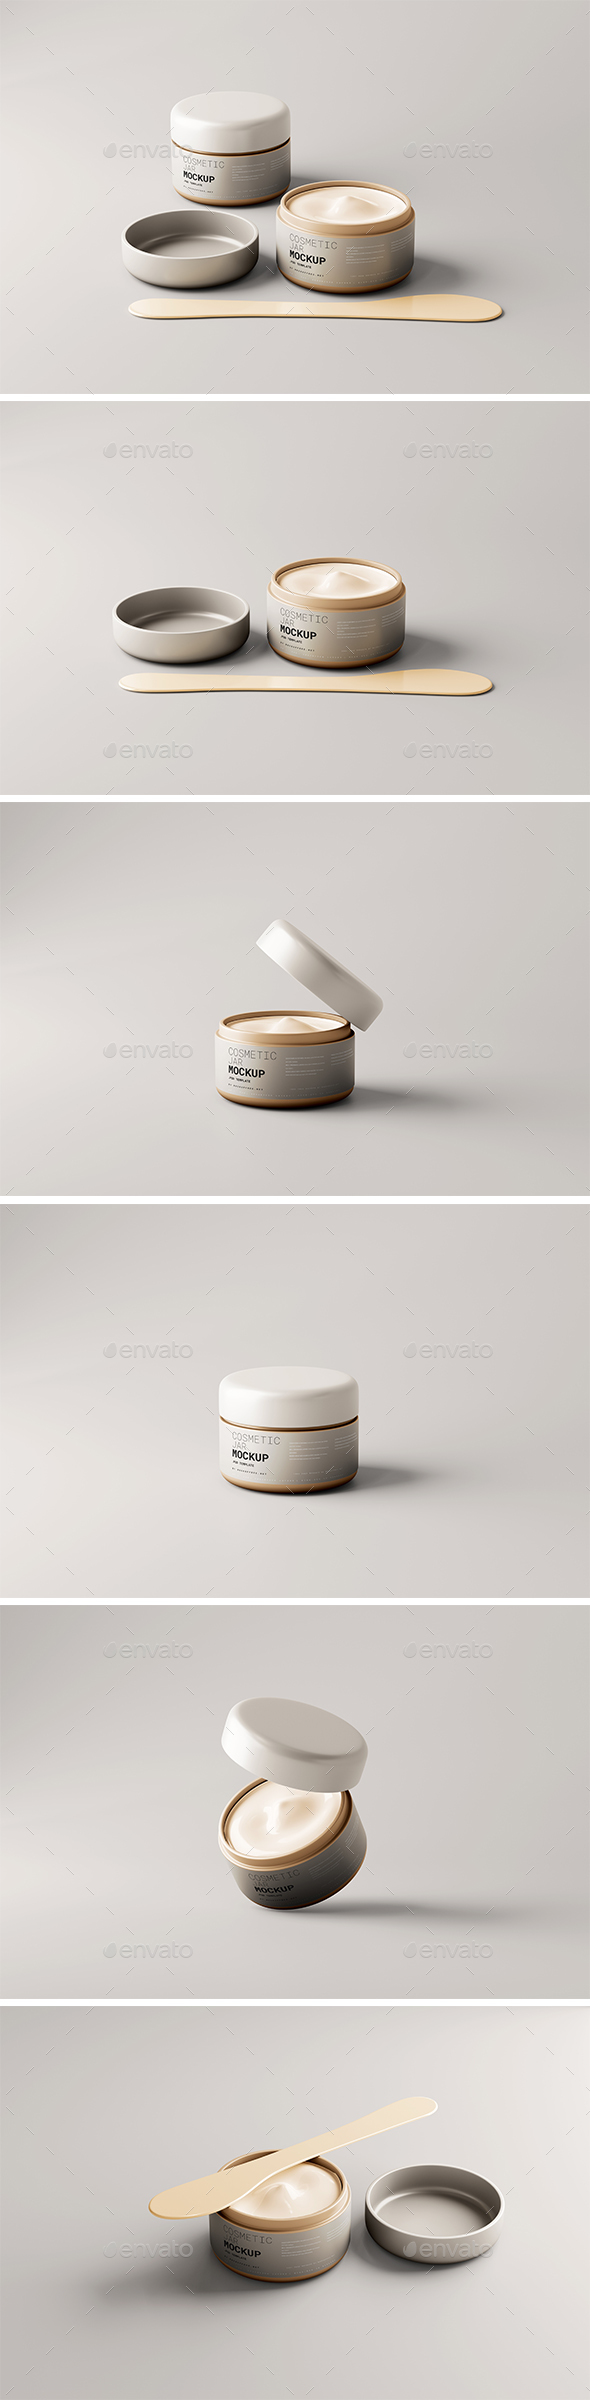 [DOWNLOAD]Cosmetic Jar with Transparent Label Mockup